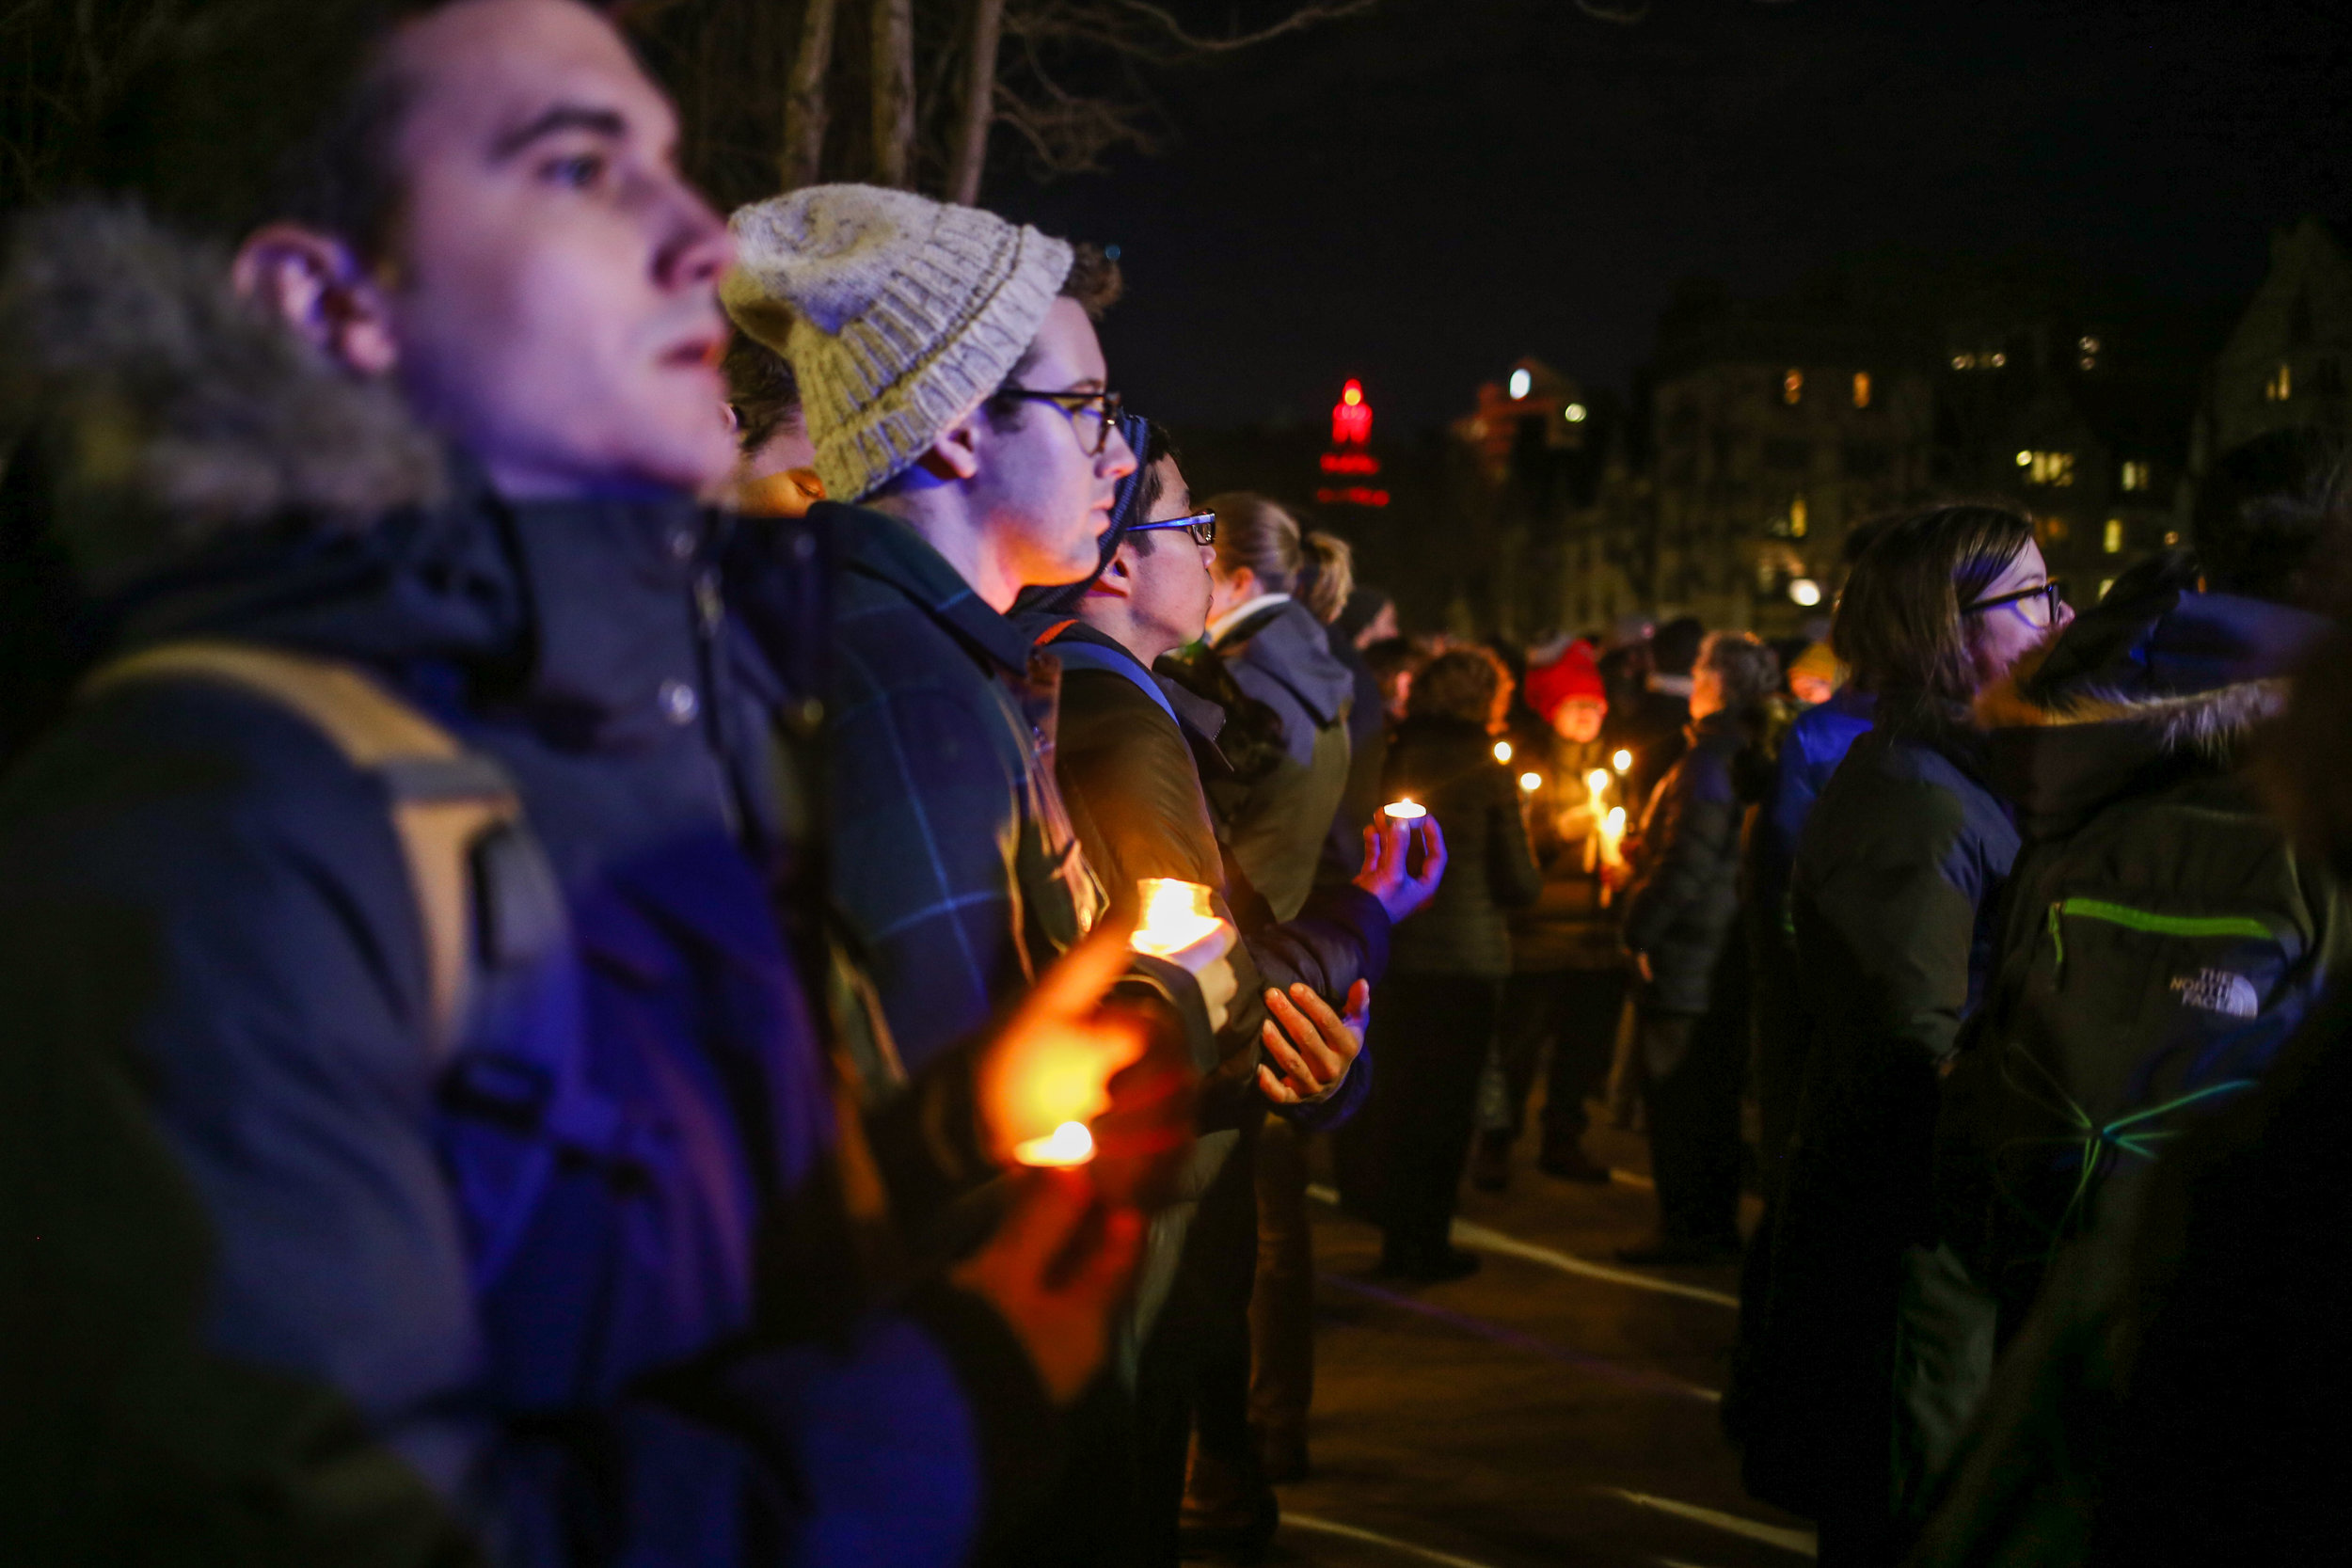   New Haven, Connecticut - January 29th, 2017: Vigil held for immigrants and refugees at Yale University.  